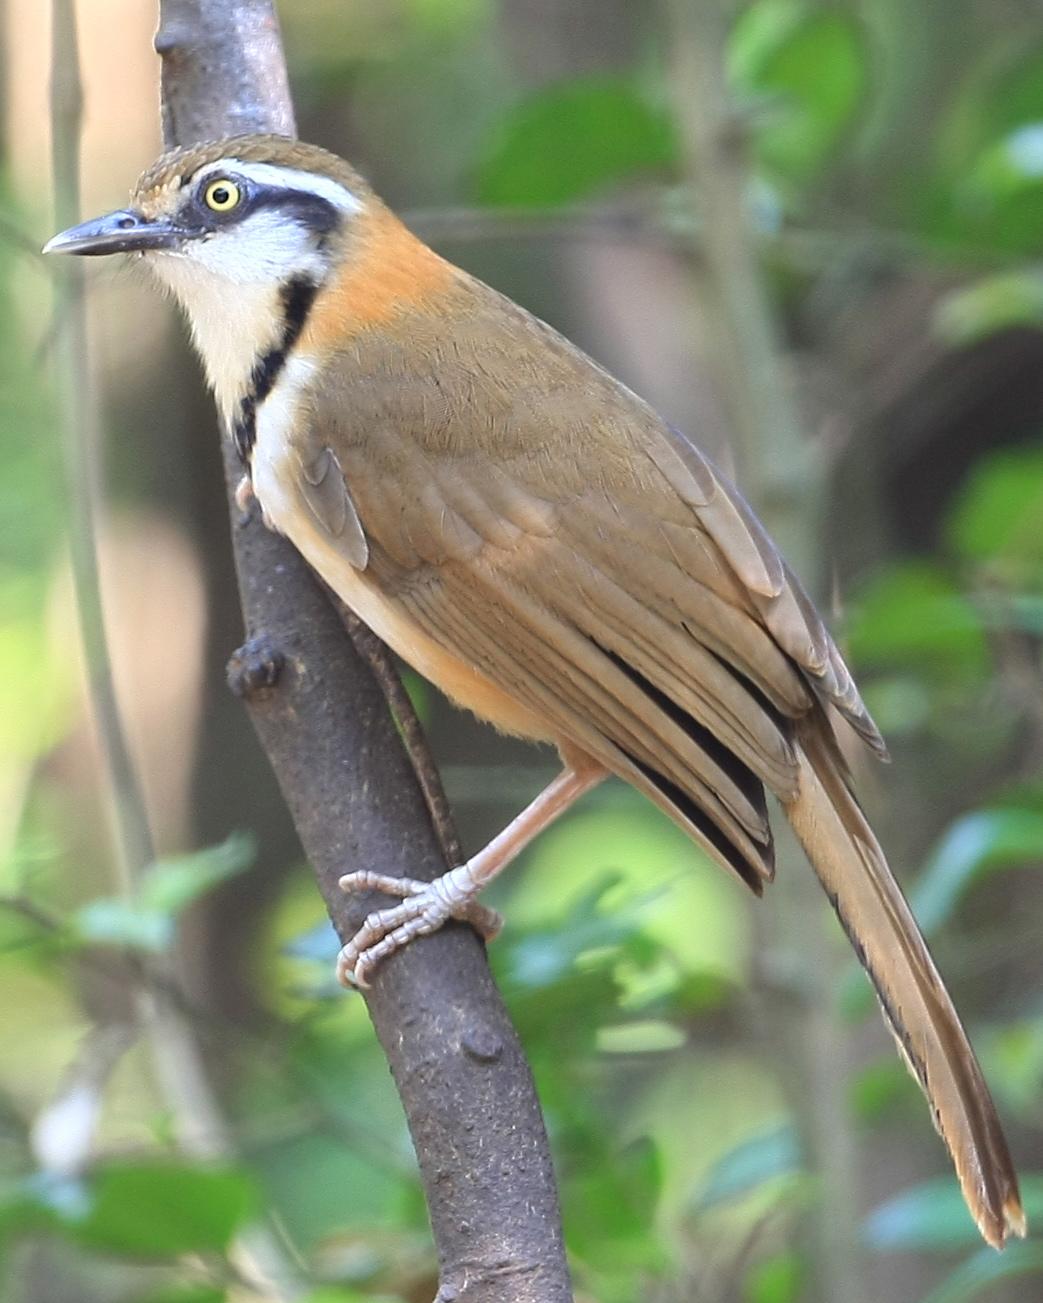 Lesser Necklaced Laughingthrush Photo by Monte Taylor